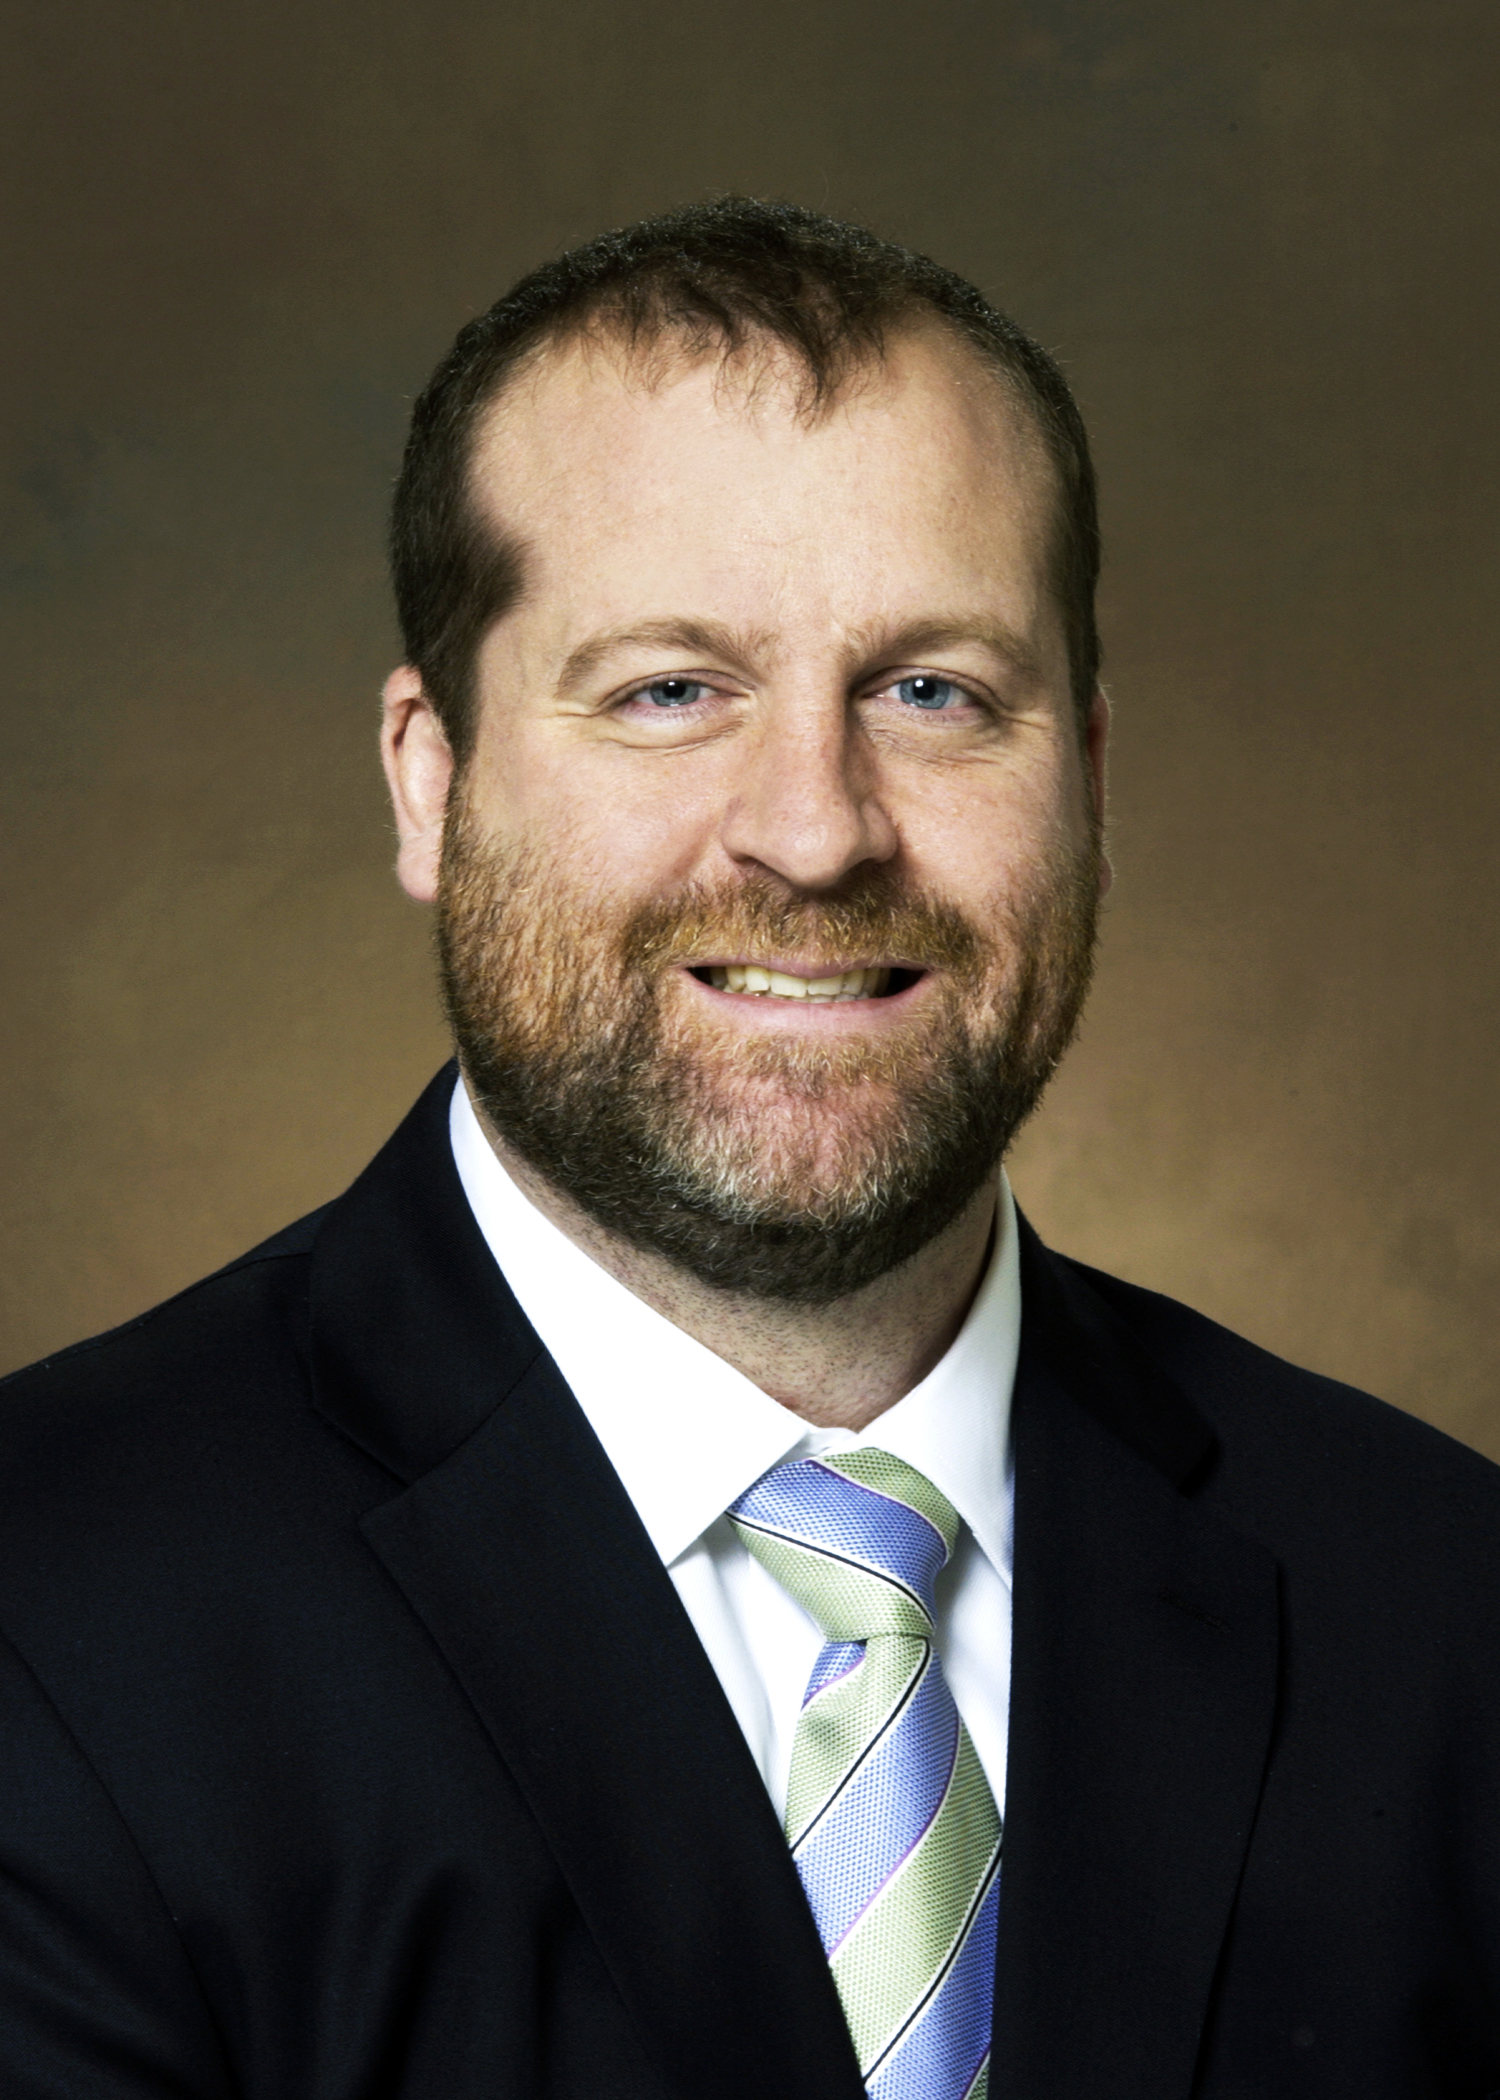 David Ripplinger, NDSU Bioproducts and Bioenergy Economist and Assistant Professor